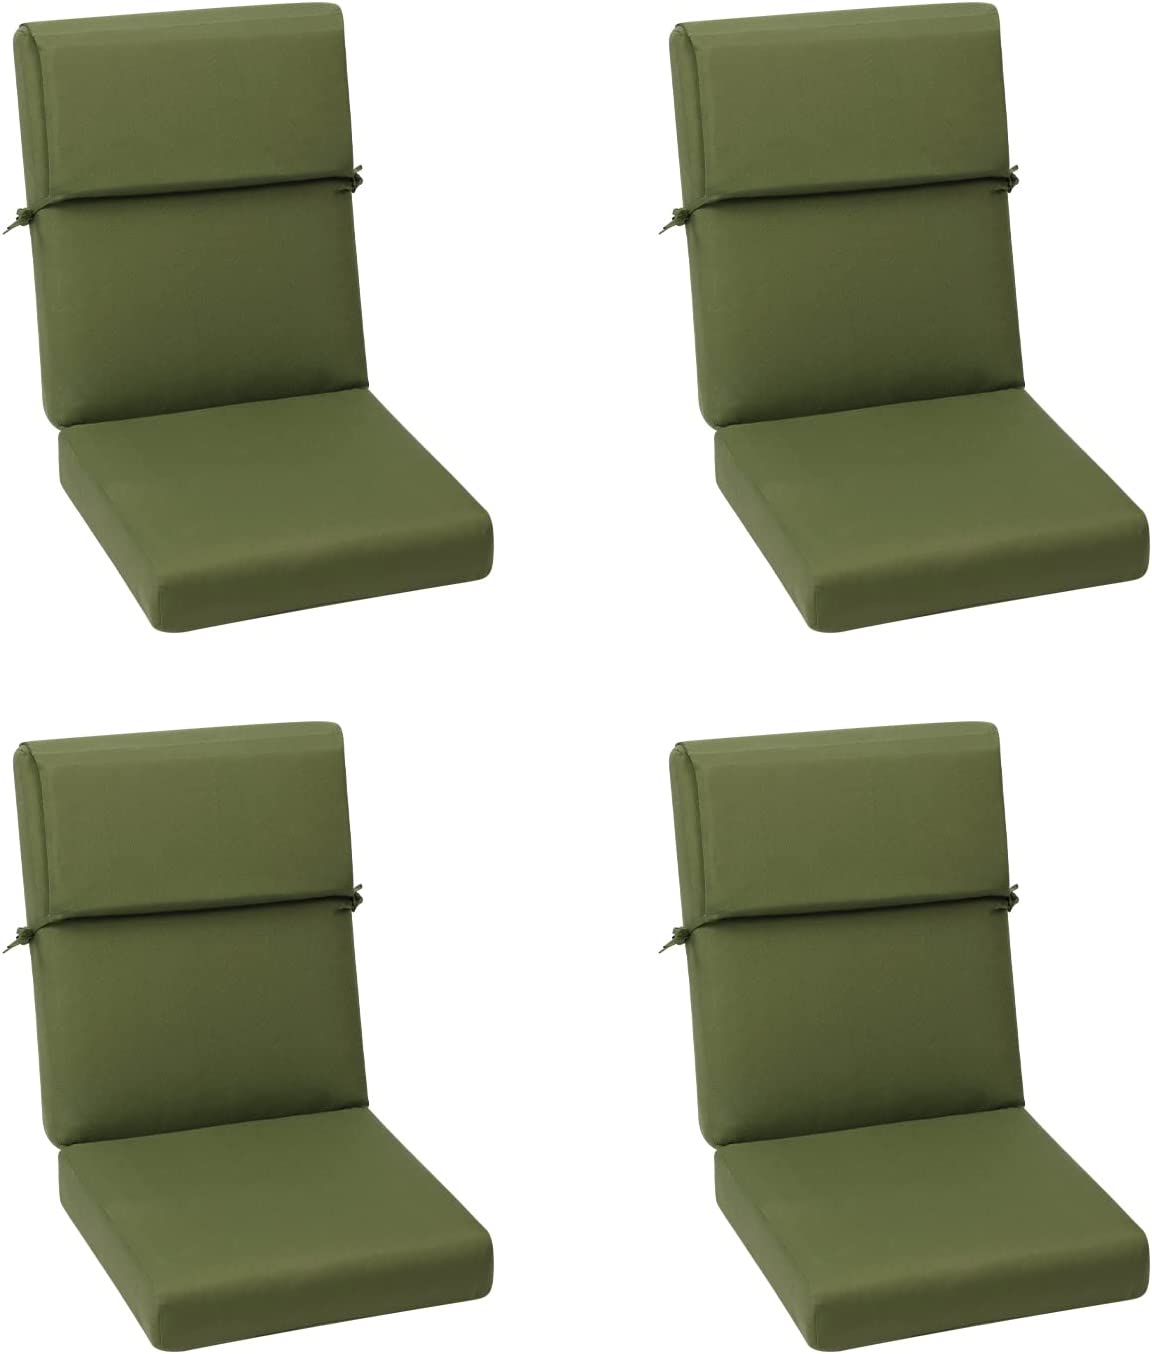 High Back Chair Cushions Set of 4, UV-Protected & Water-Resistant, 46x21x4 Inches CUSHION Aoodor Green  